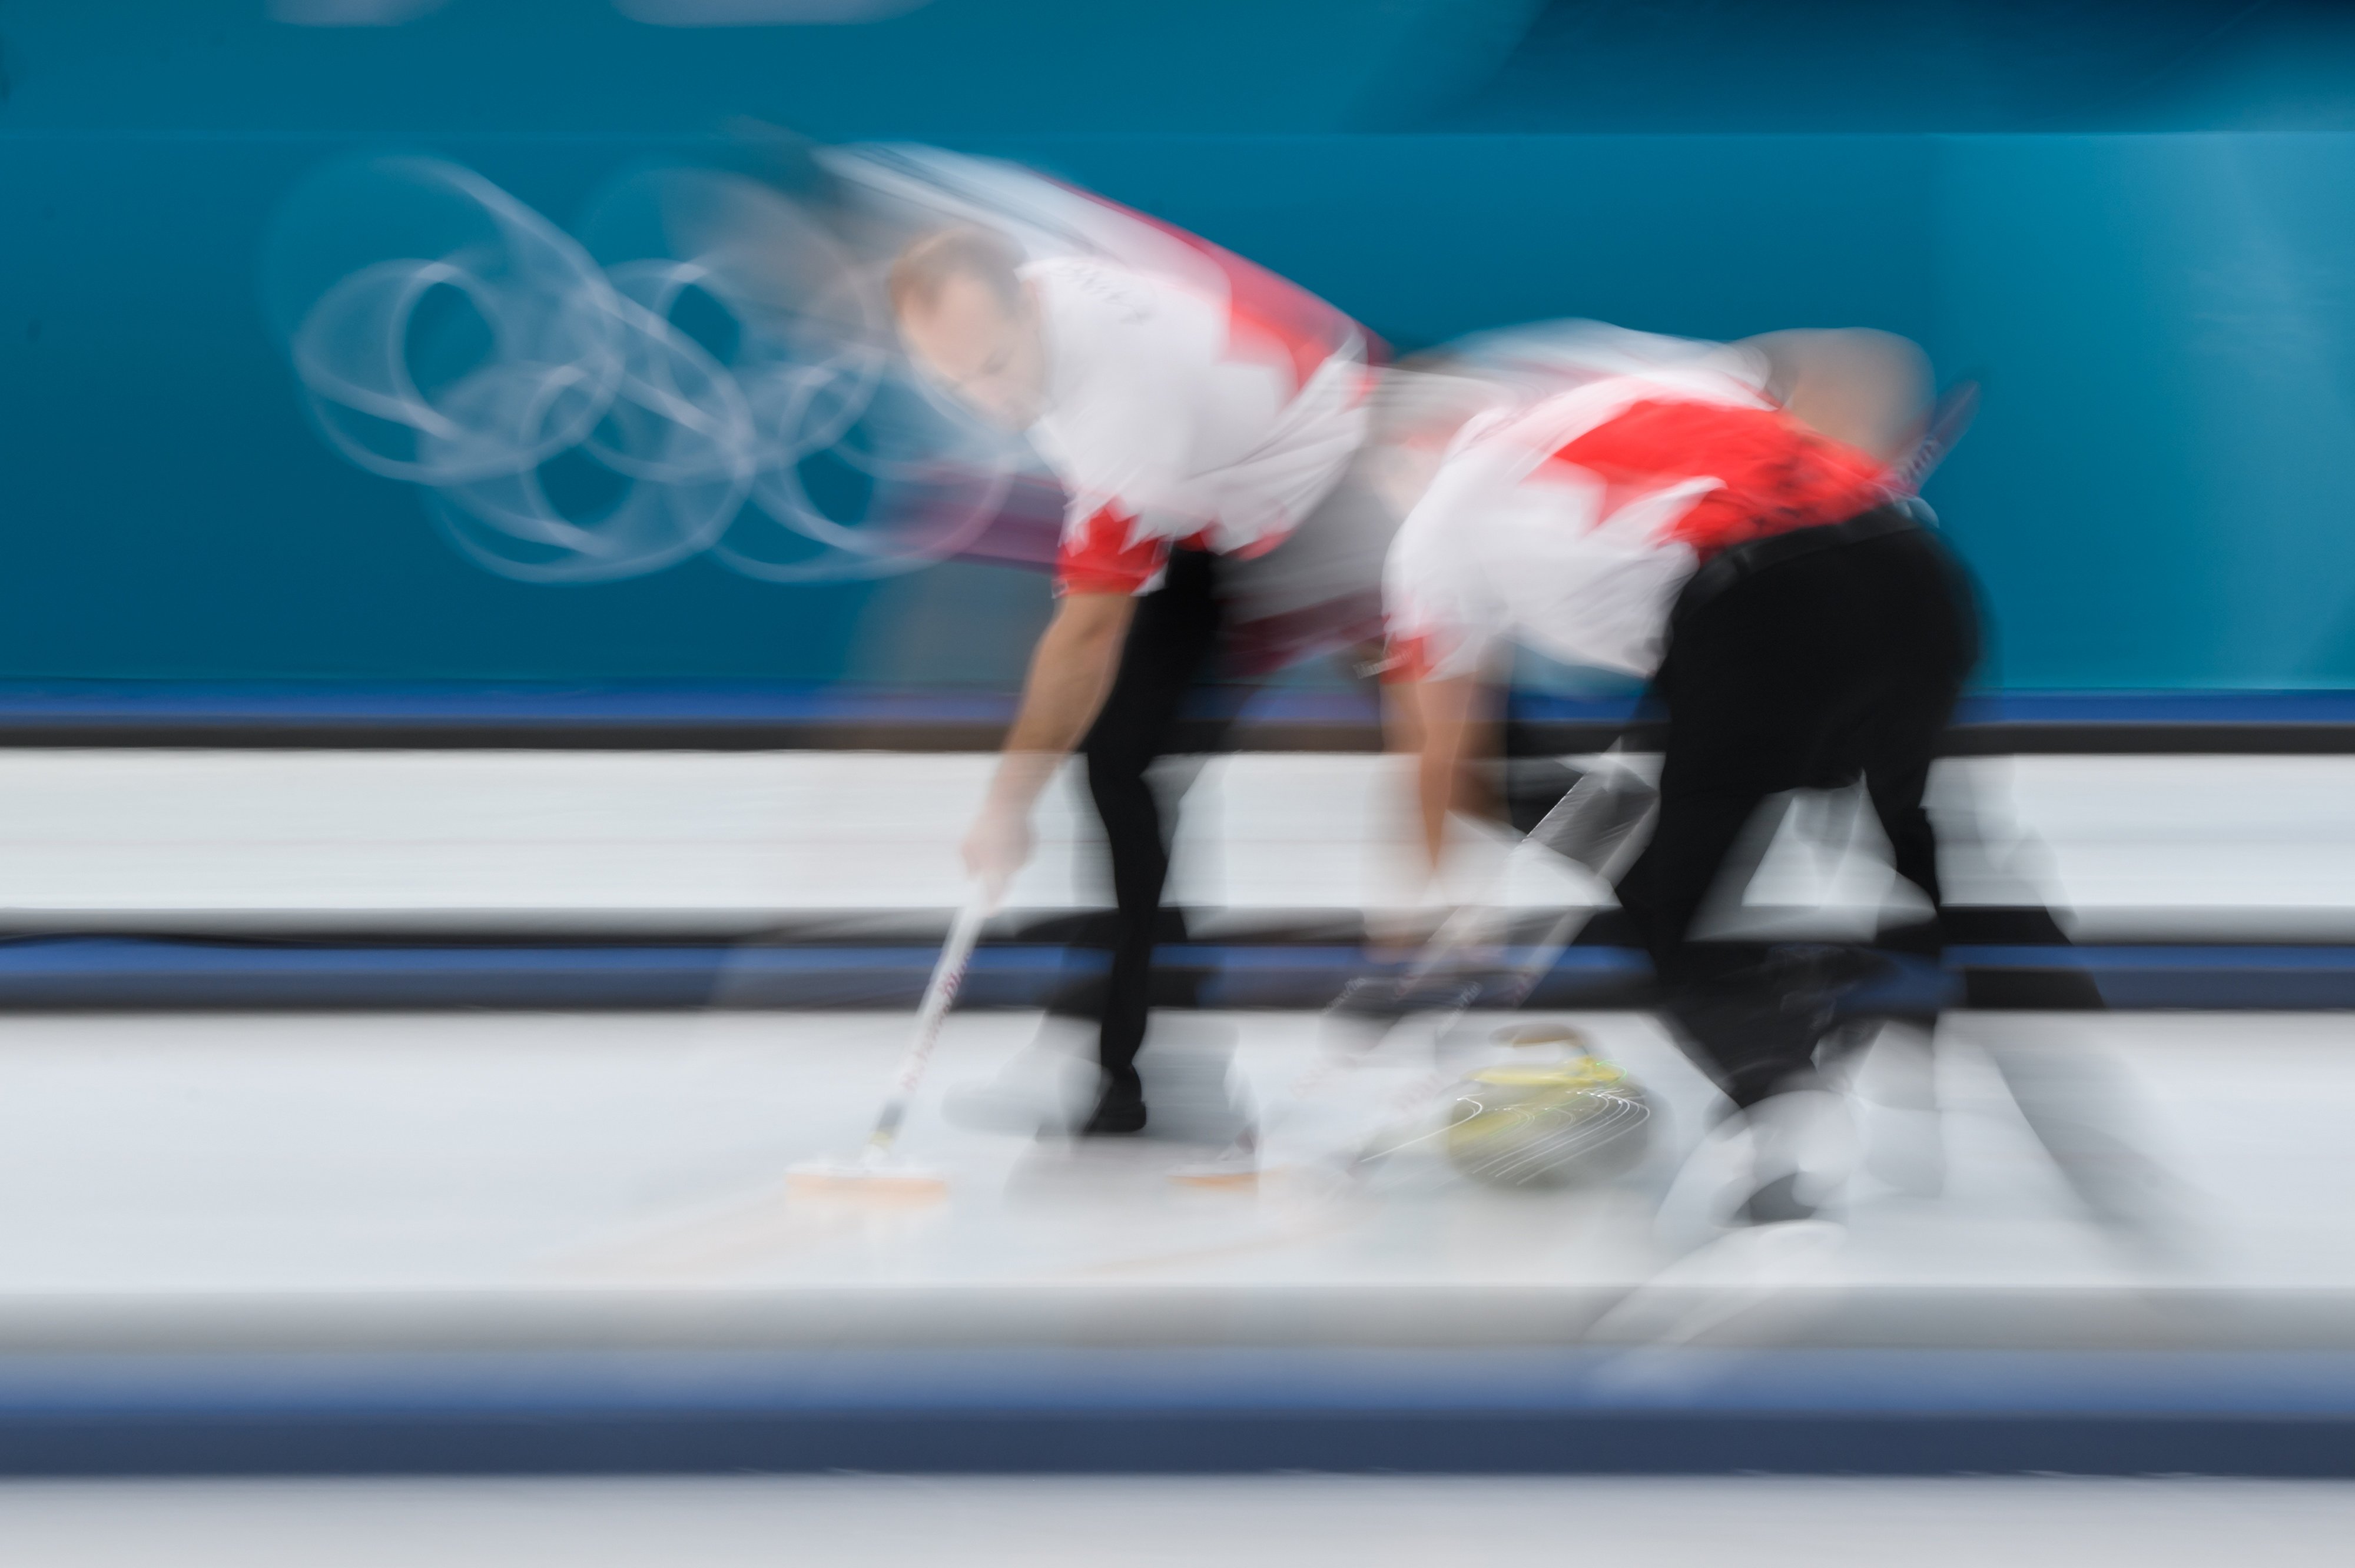 Blurry photo of two curlers sweeping 